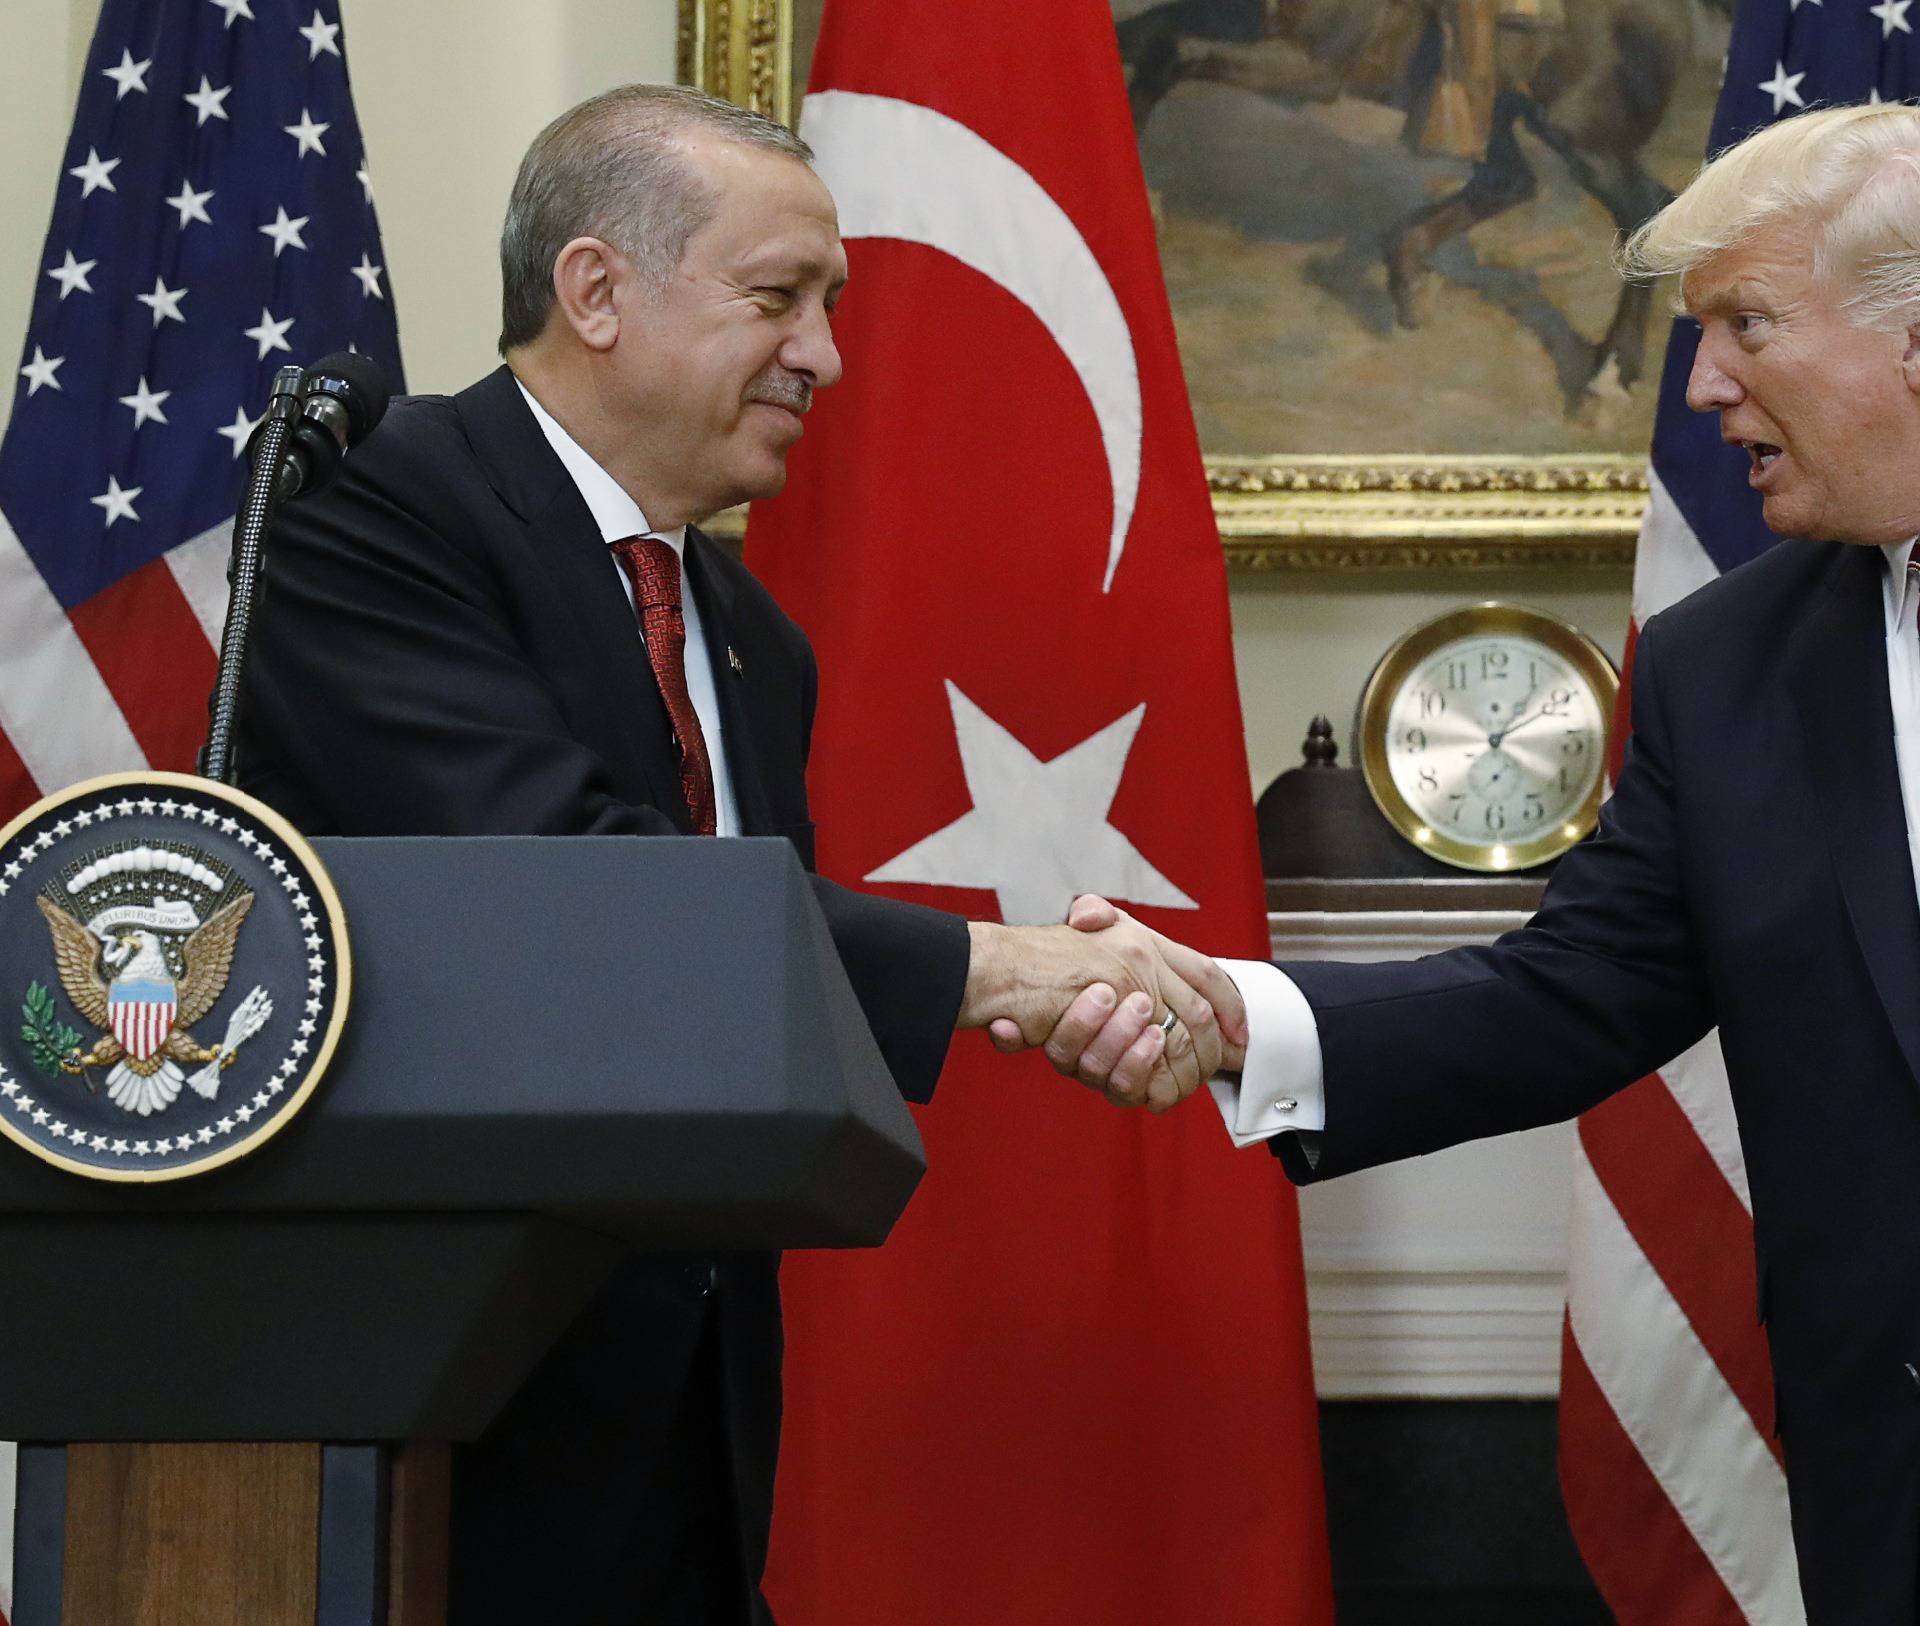 Turkey's President Erdogan shakes hands with U.S. President Trump in the Roosevelt Room of the White House in Washington